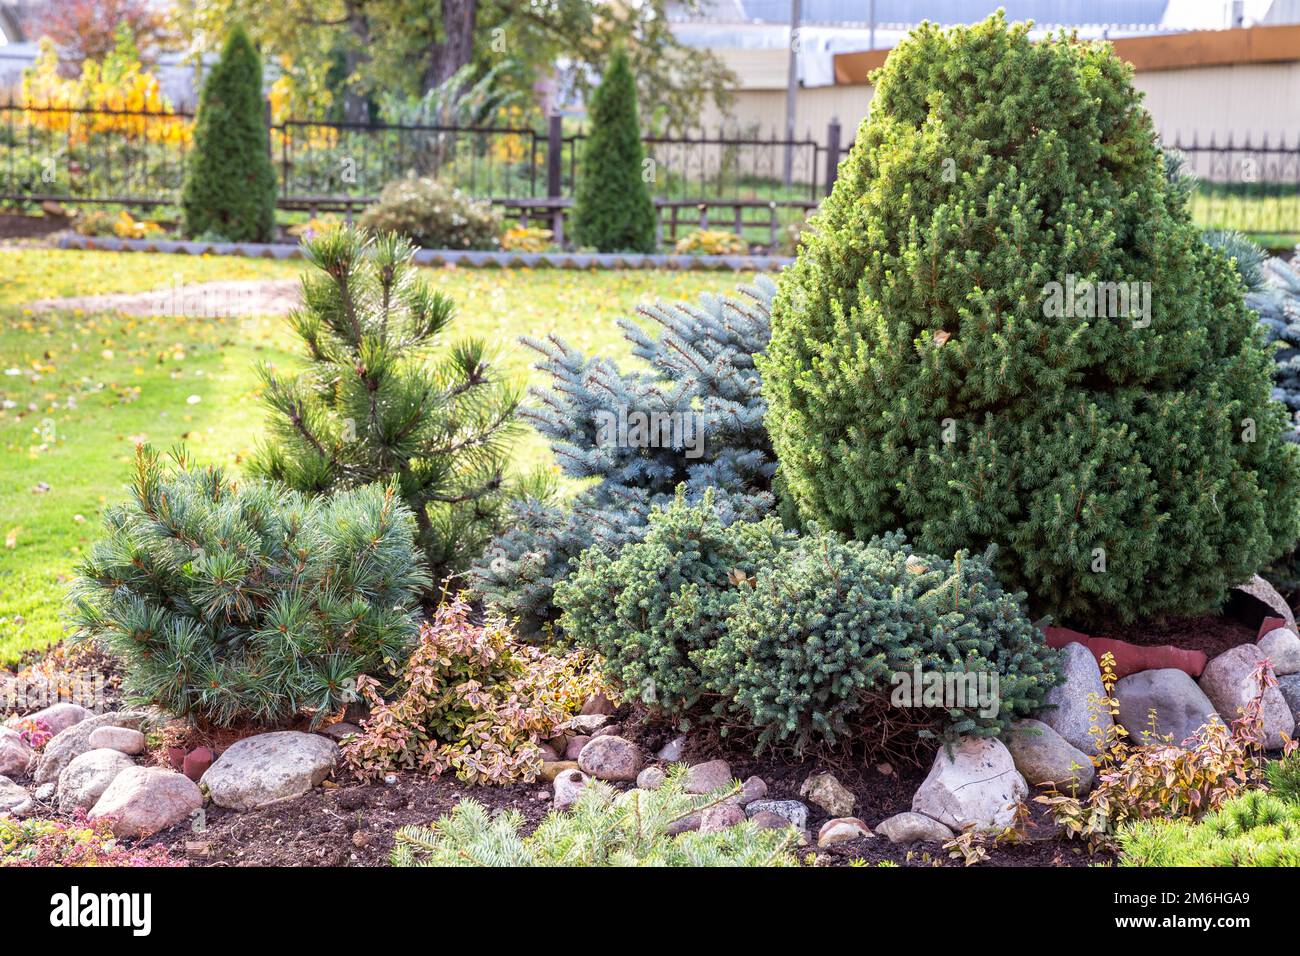 Coniferous rockery in landscaping. Different types of pine and spruce with different color needles Stock Photo